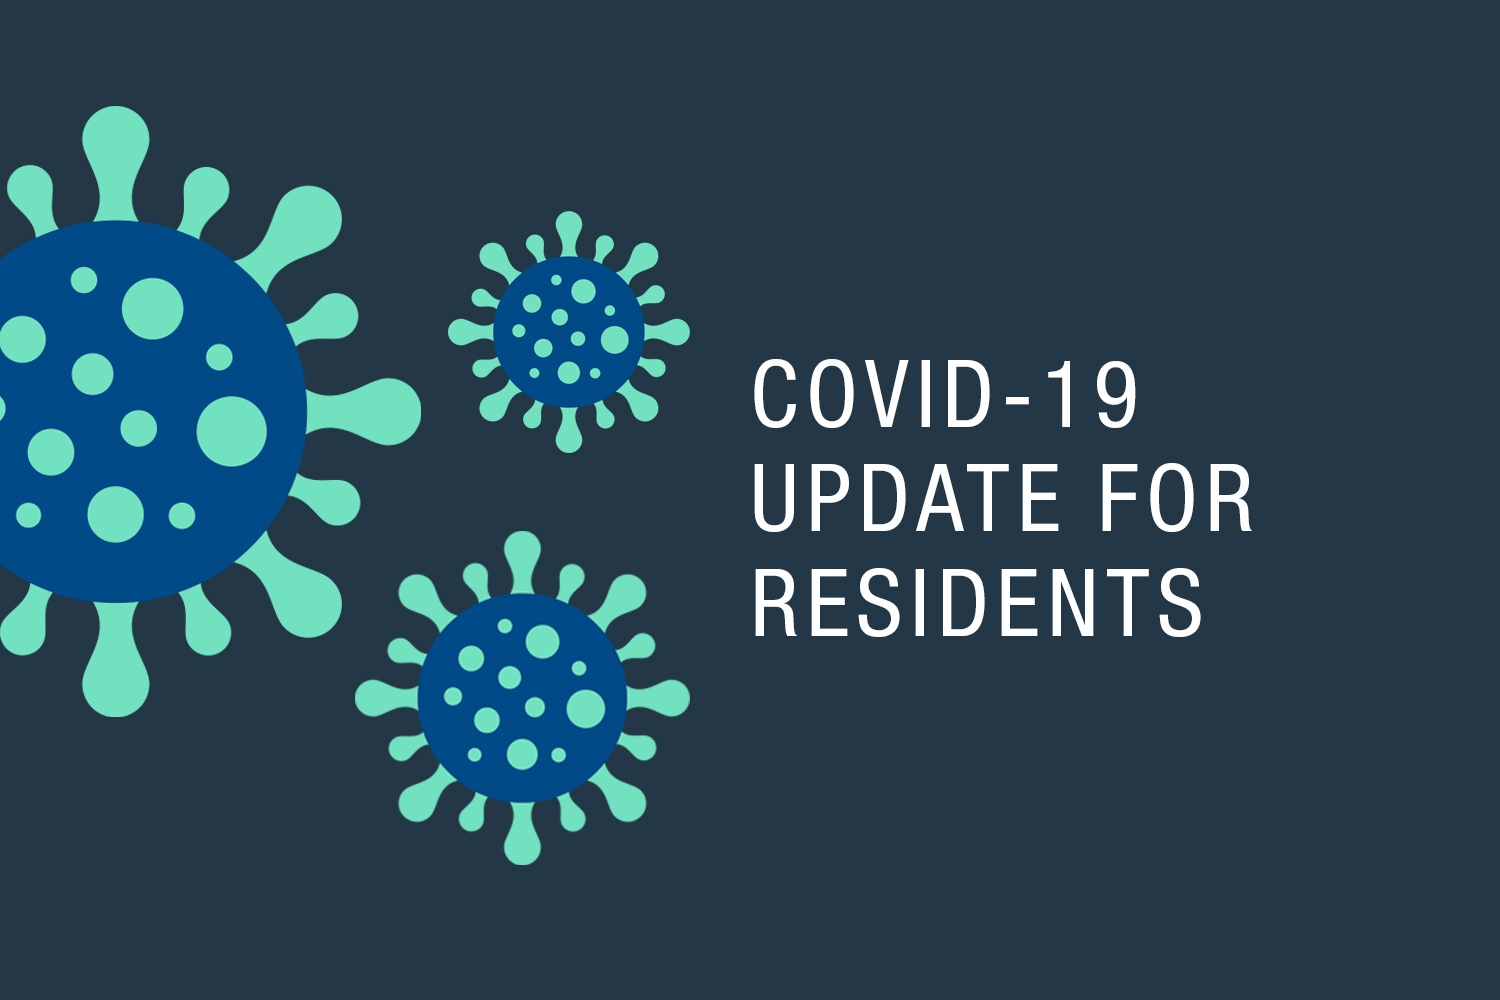 COVID-19 Update for Residents